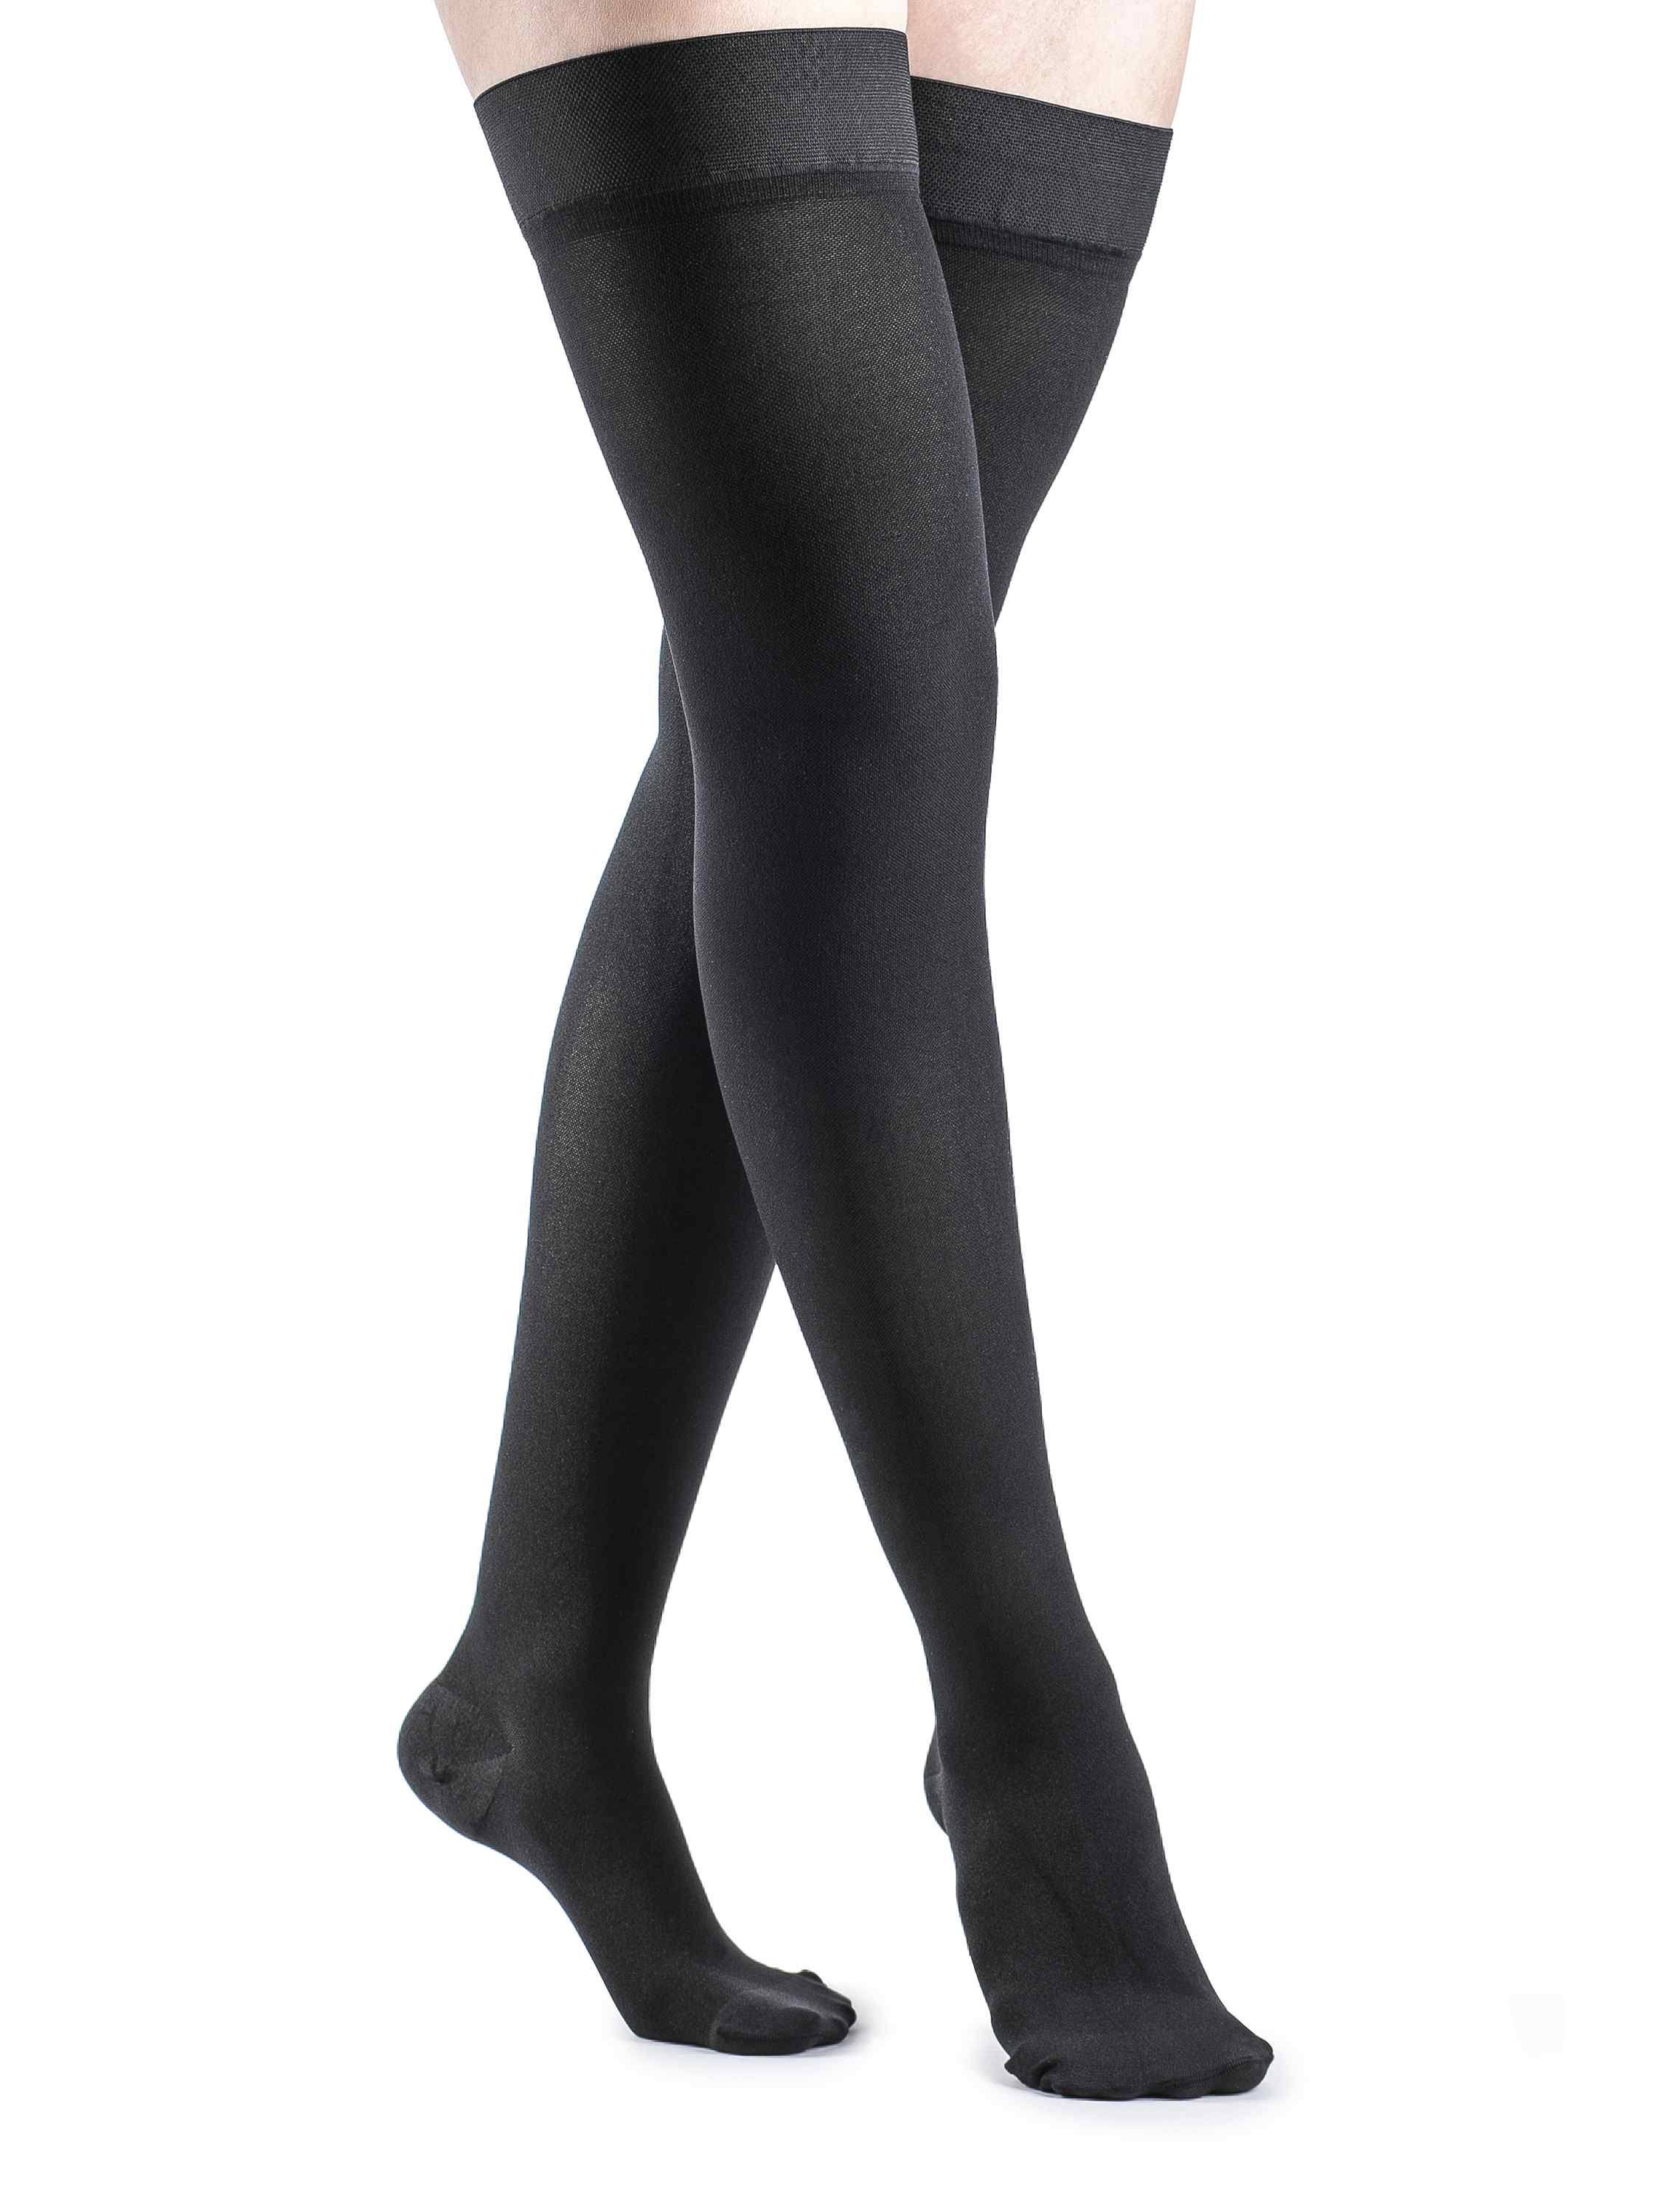 Sigvaris Eversheer Closed Toe Thigh Highs with Grip Top - Black, 20-30mmhg